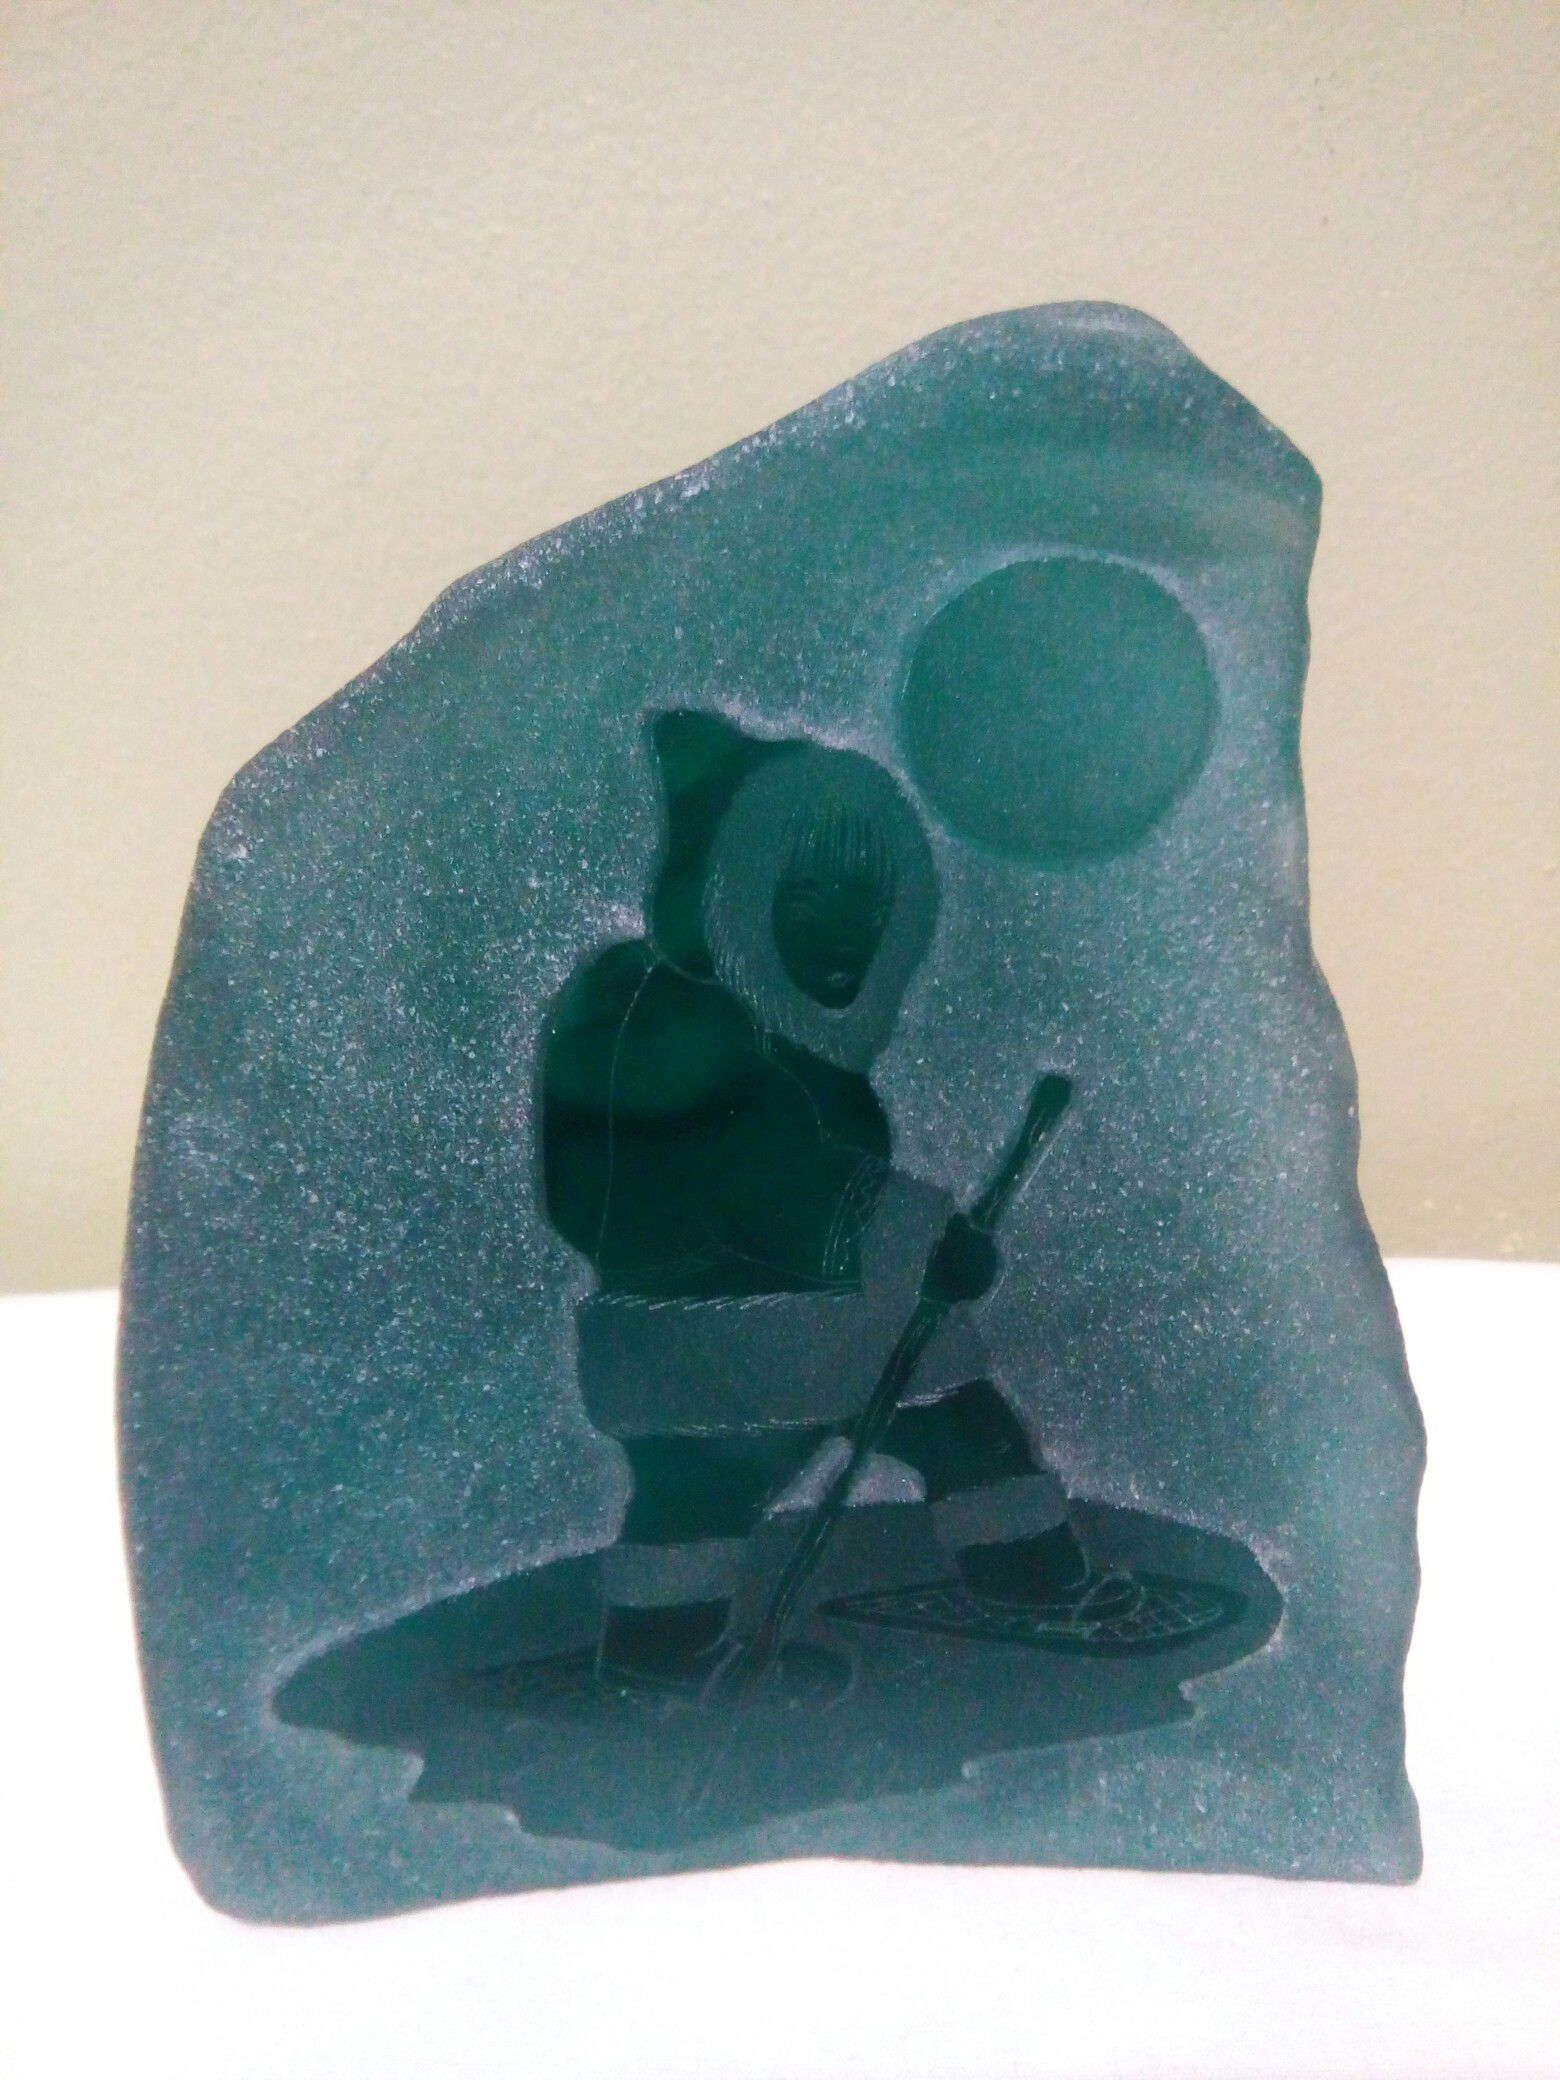 Siku Etched Canadian Art Glass Sculpture Inuit Snow Shoeing